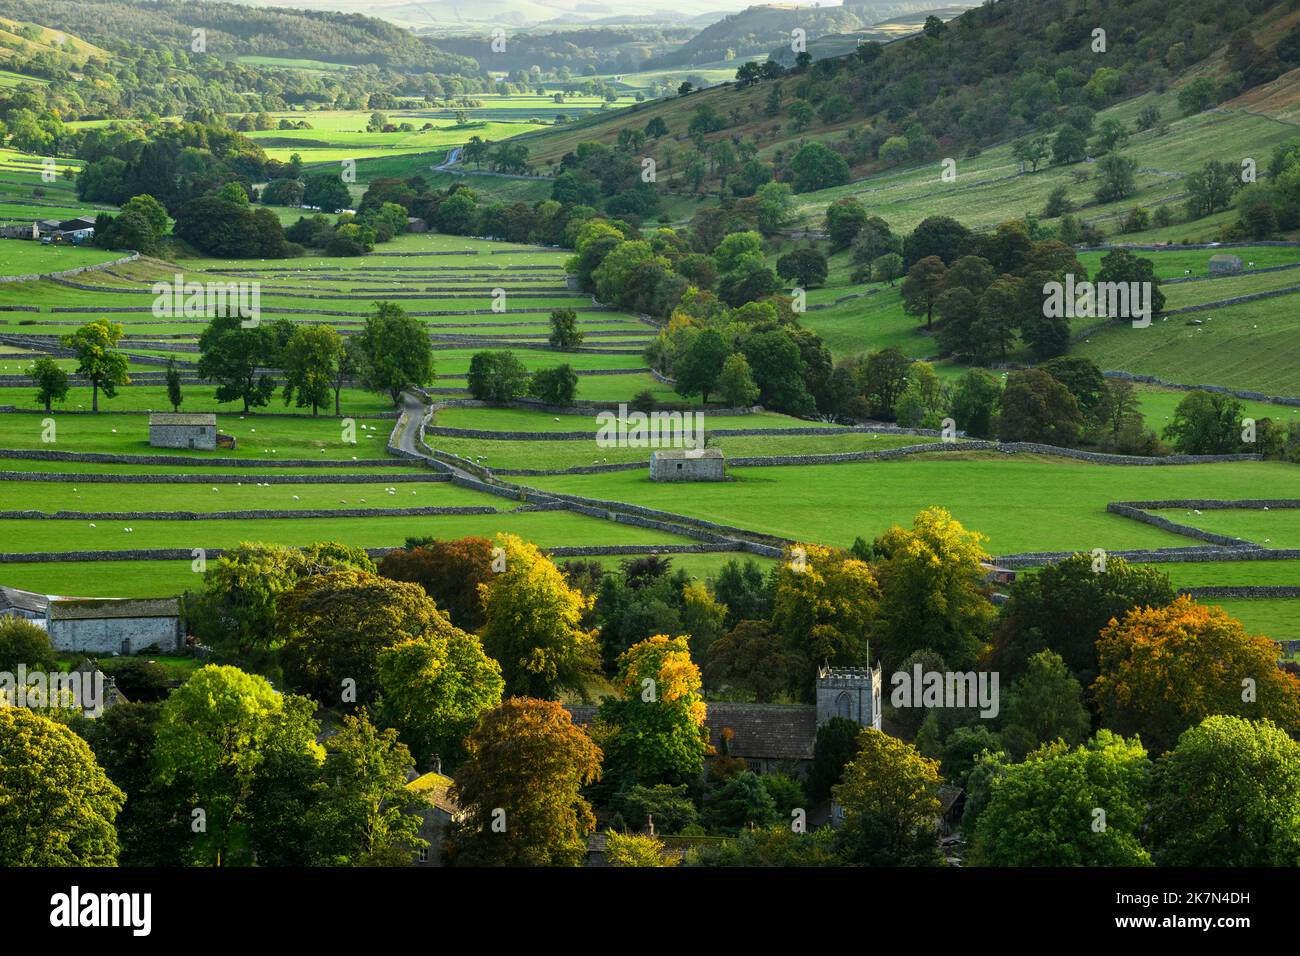 Picturesque Dales scenery (autumn colour on trees, wide flat valley floor, steep hillside slopes, old stone barns) - Kettlewell, Yorkshire England UK. Stock Photo